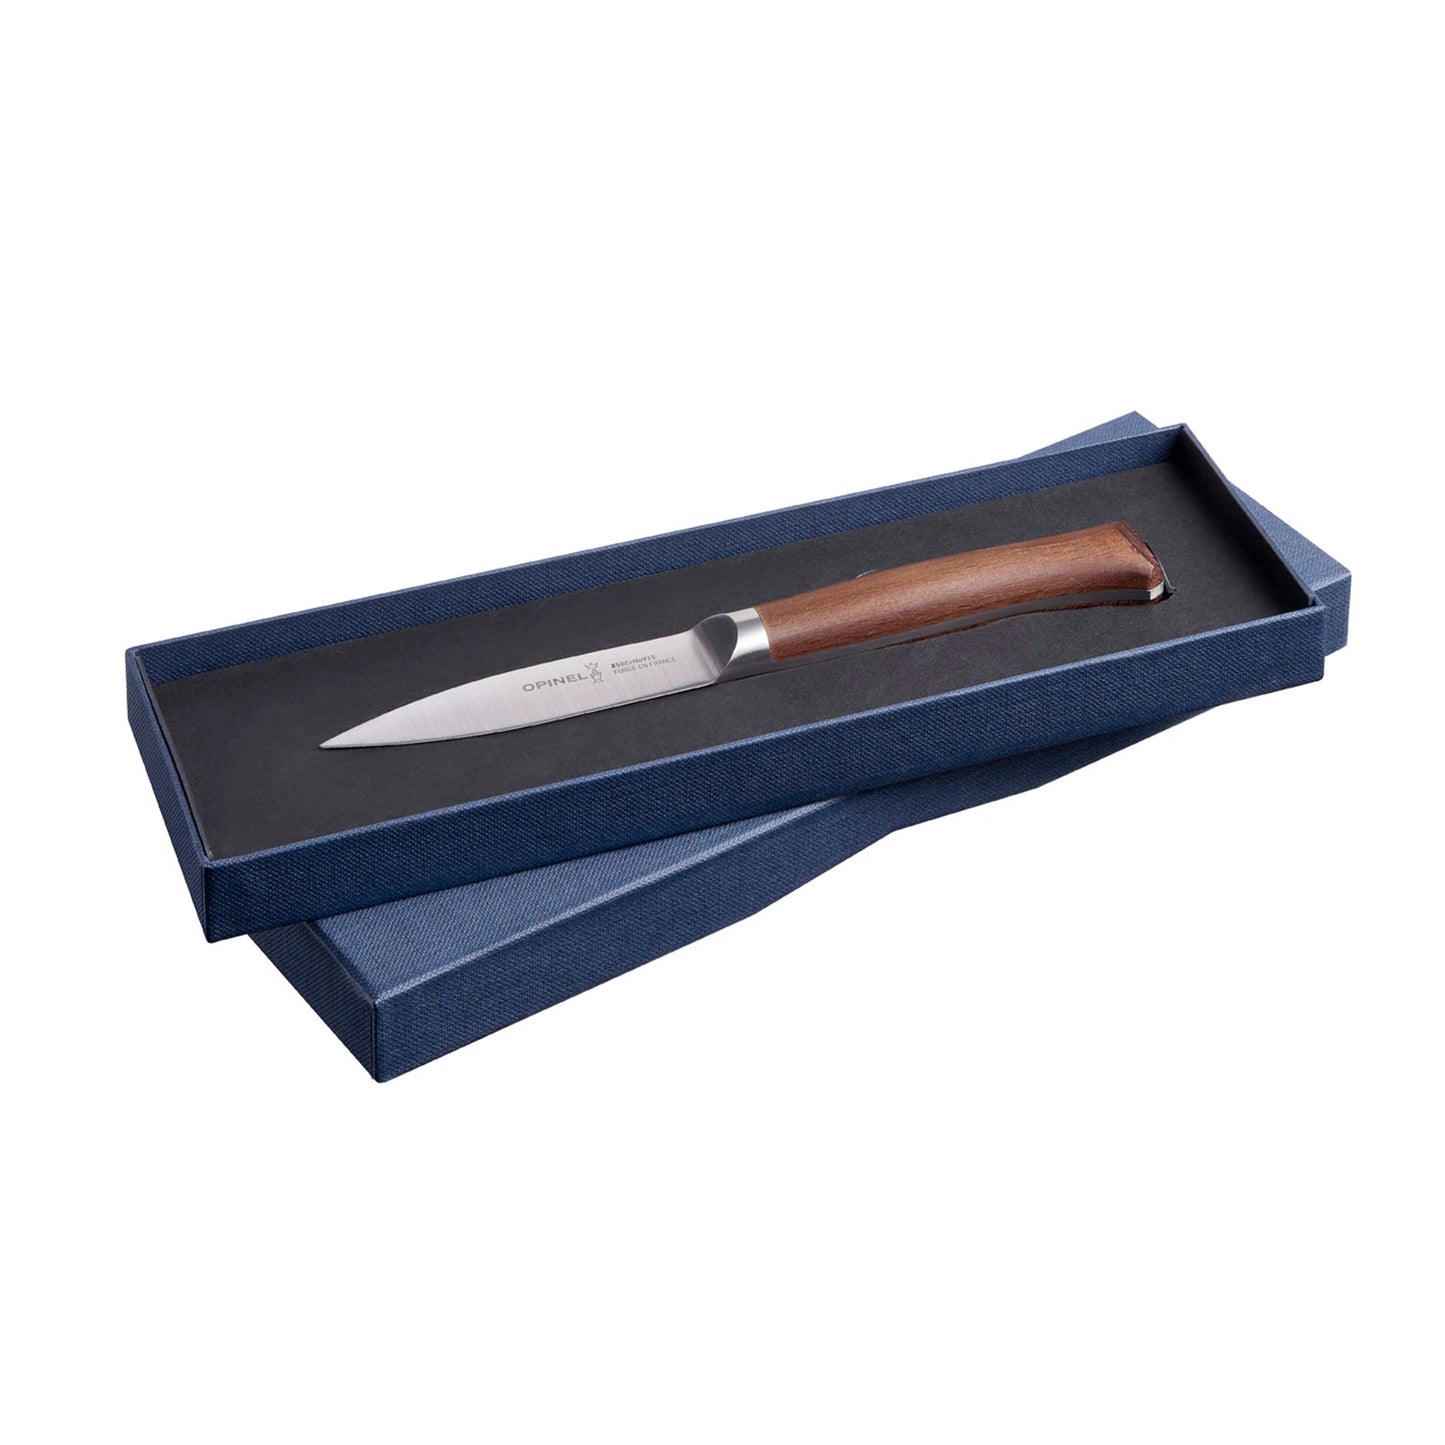 Opinel Paring Knife Les Forges 1890